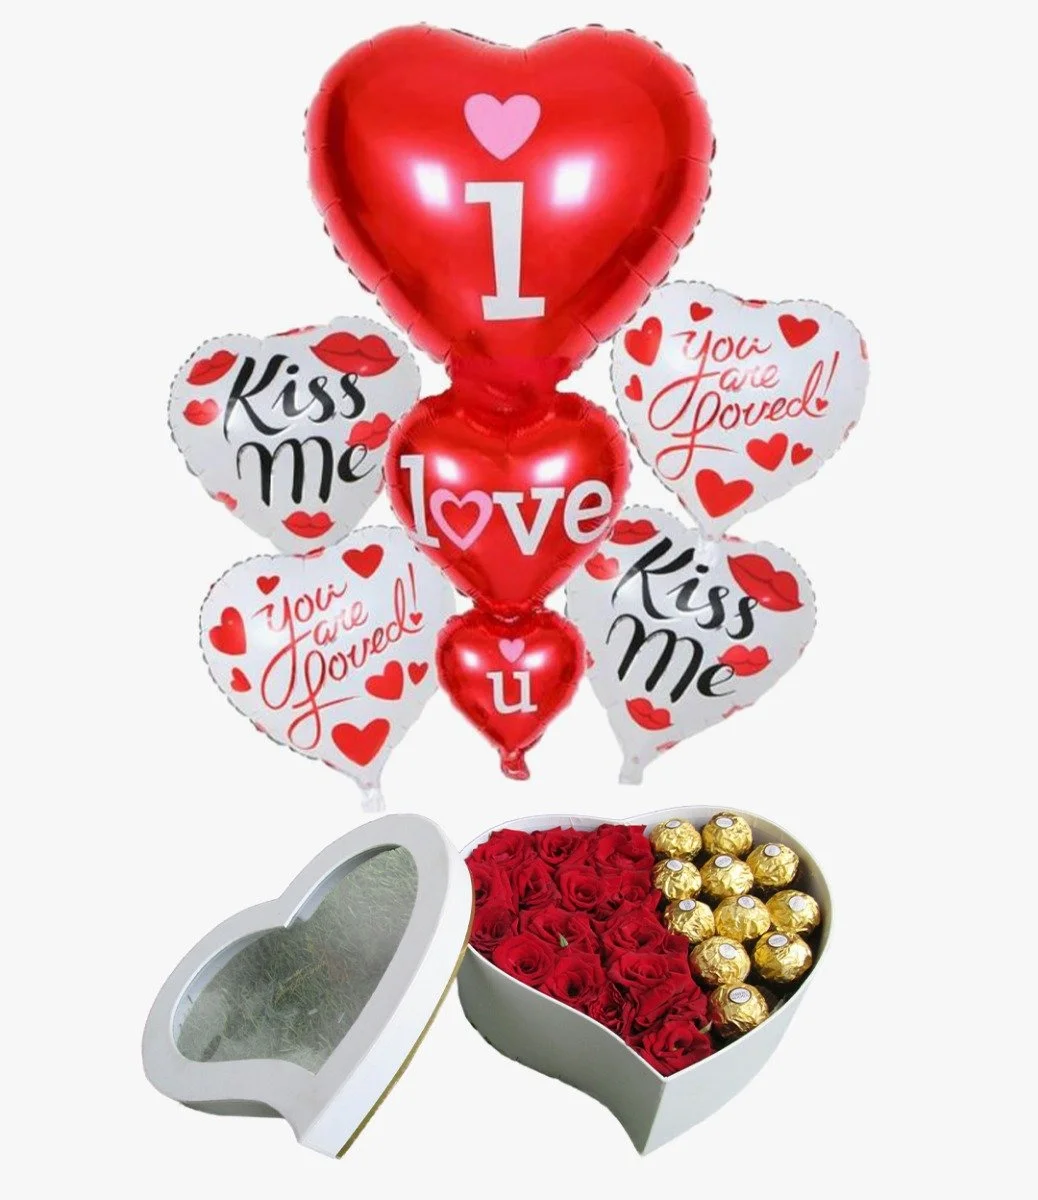 Chocolate, roses and balloons bundle